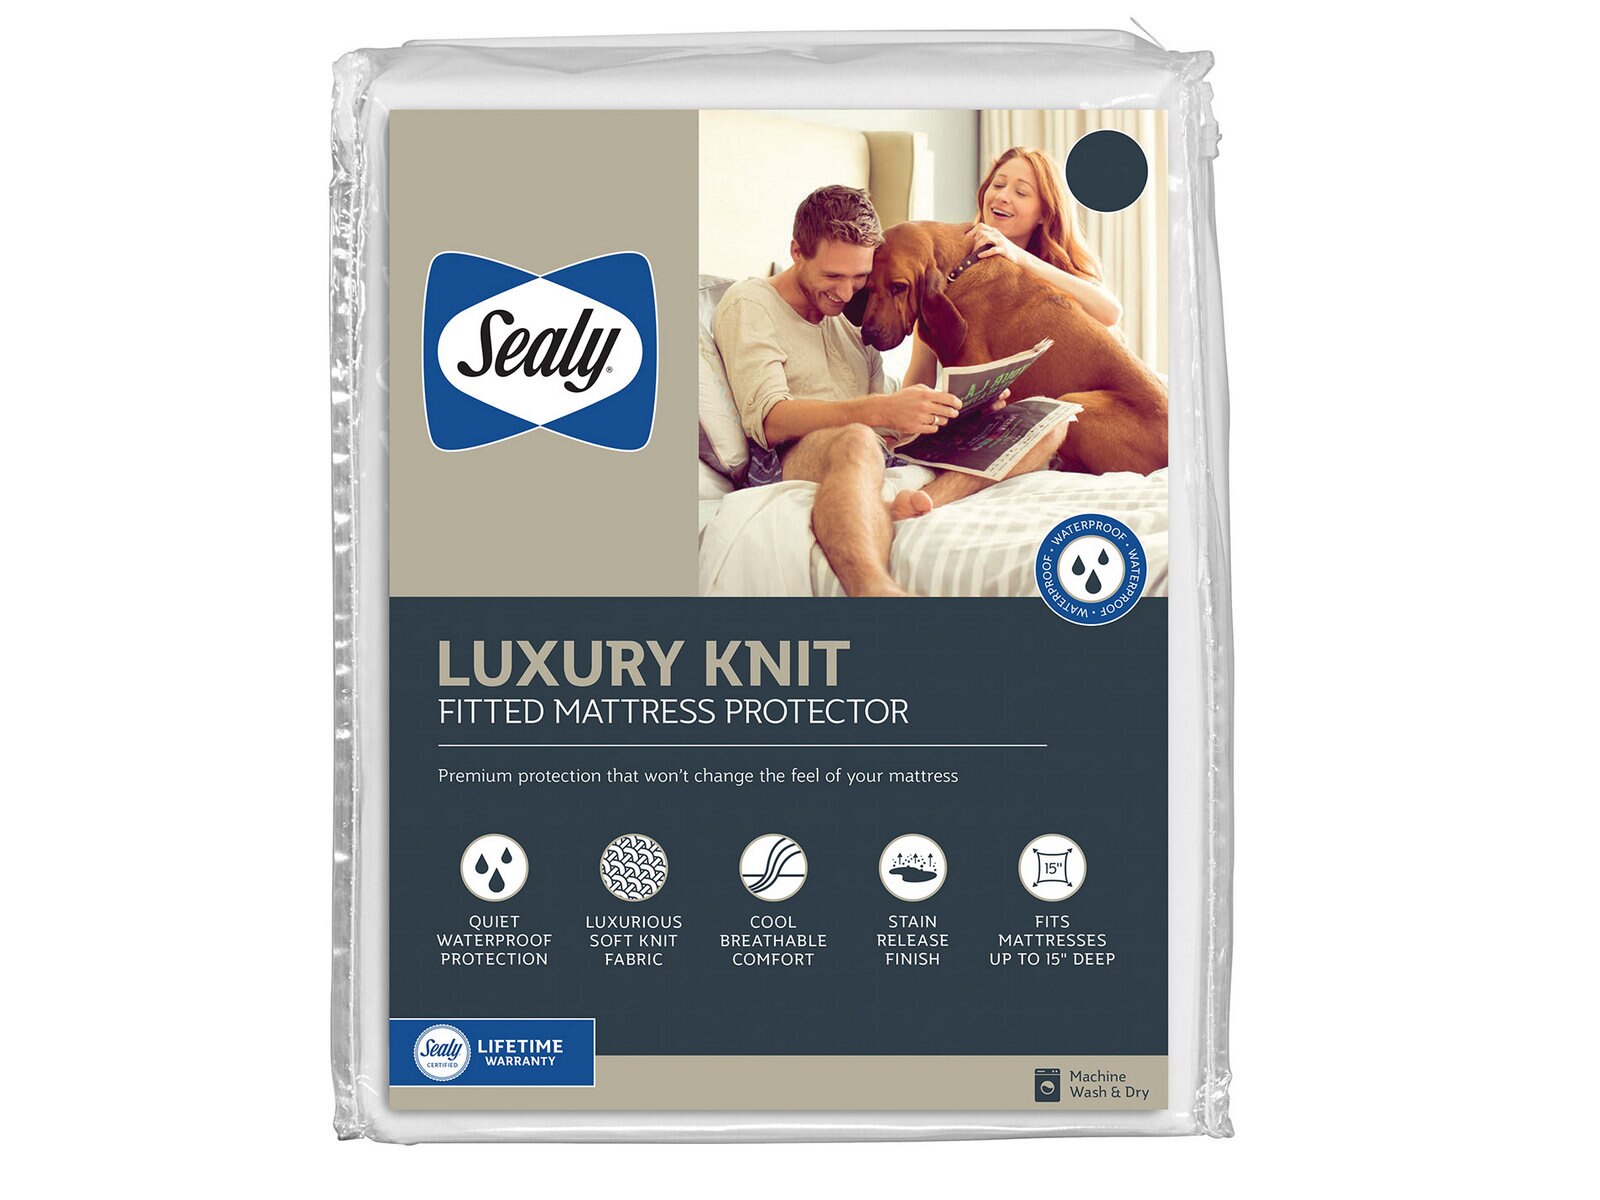 sealy luxury knit mattress protector